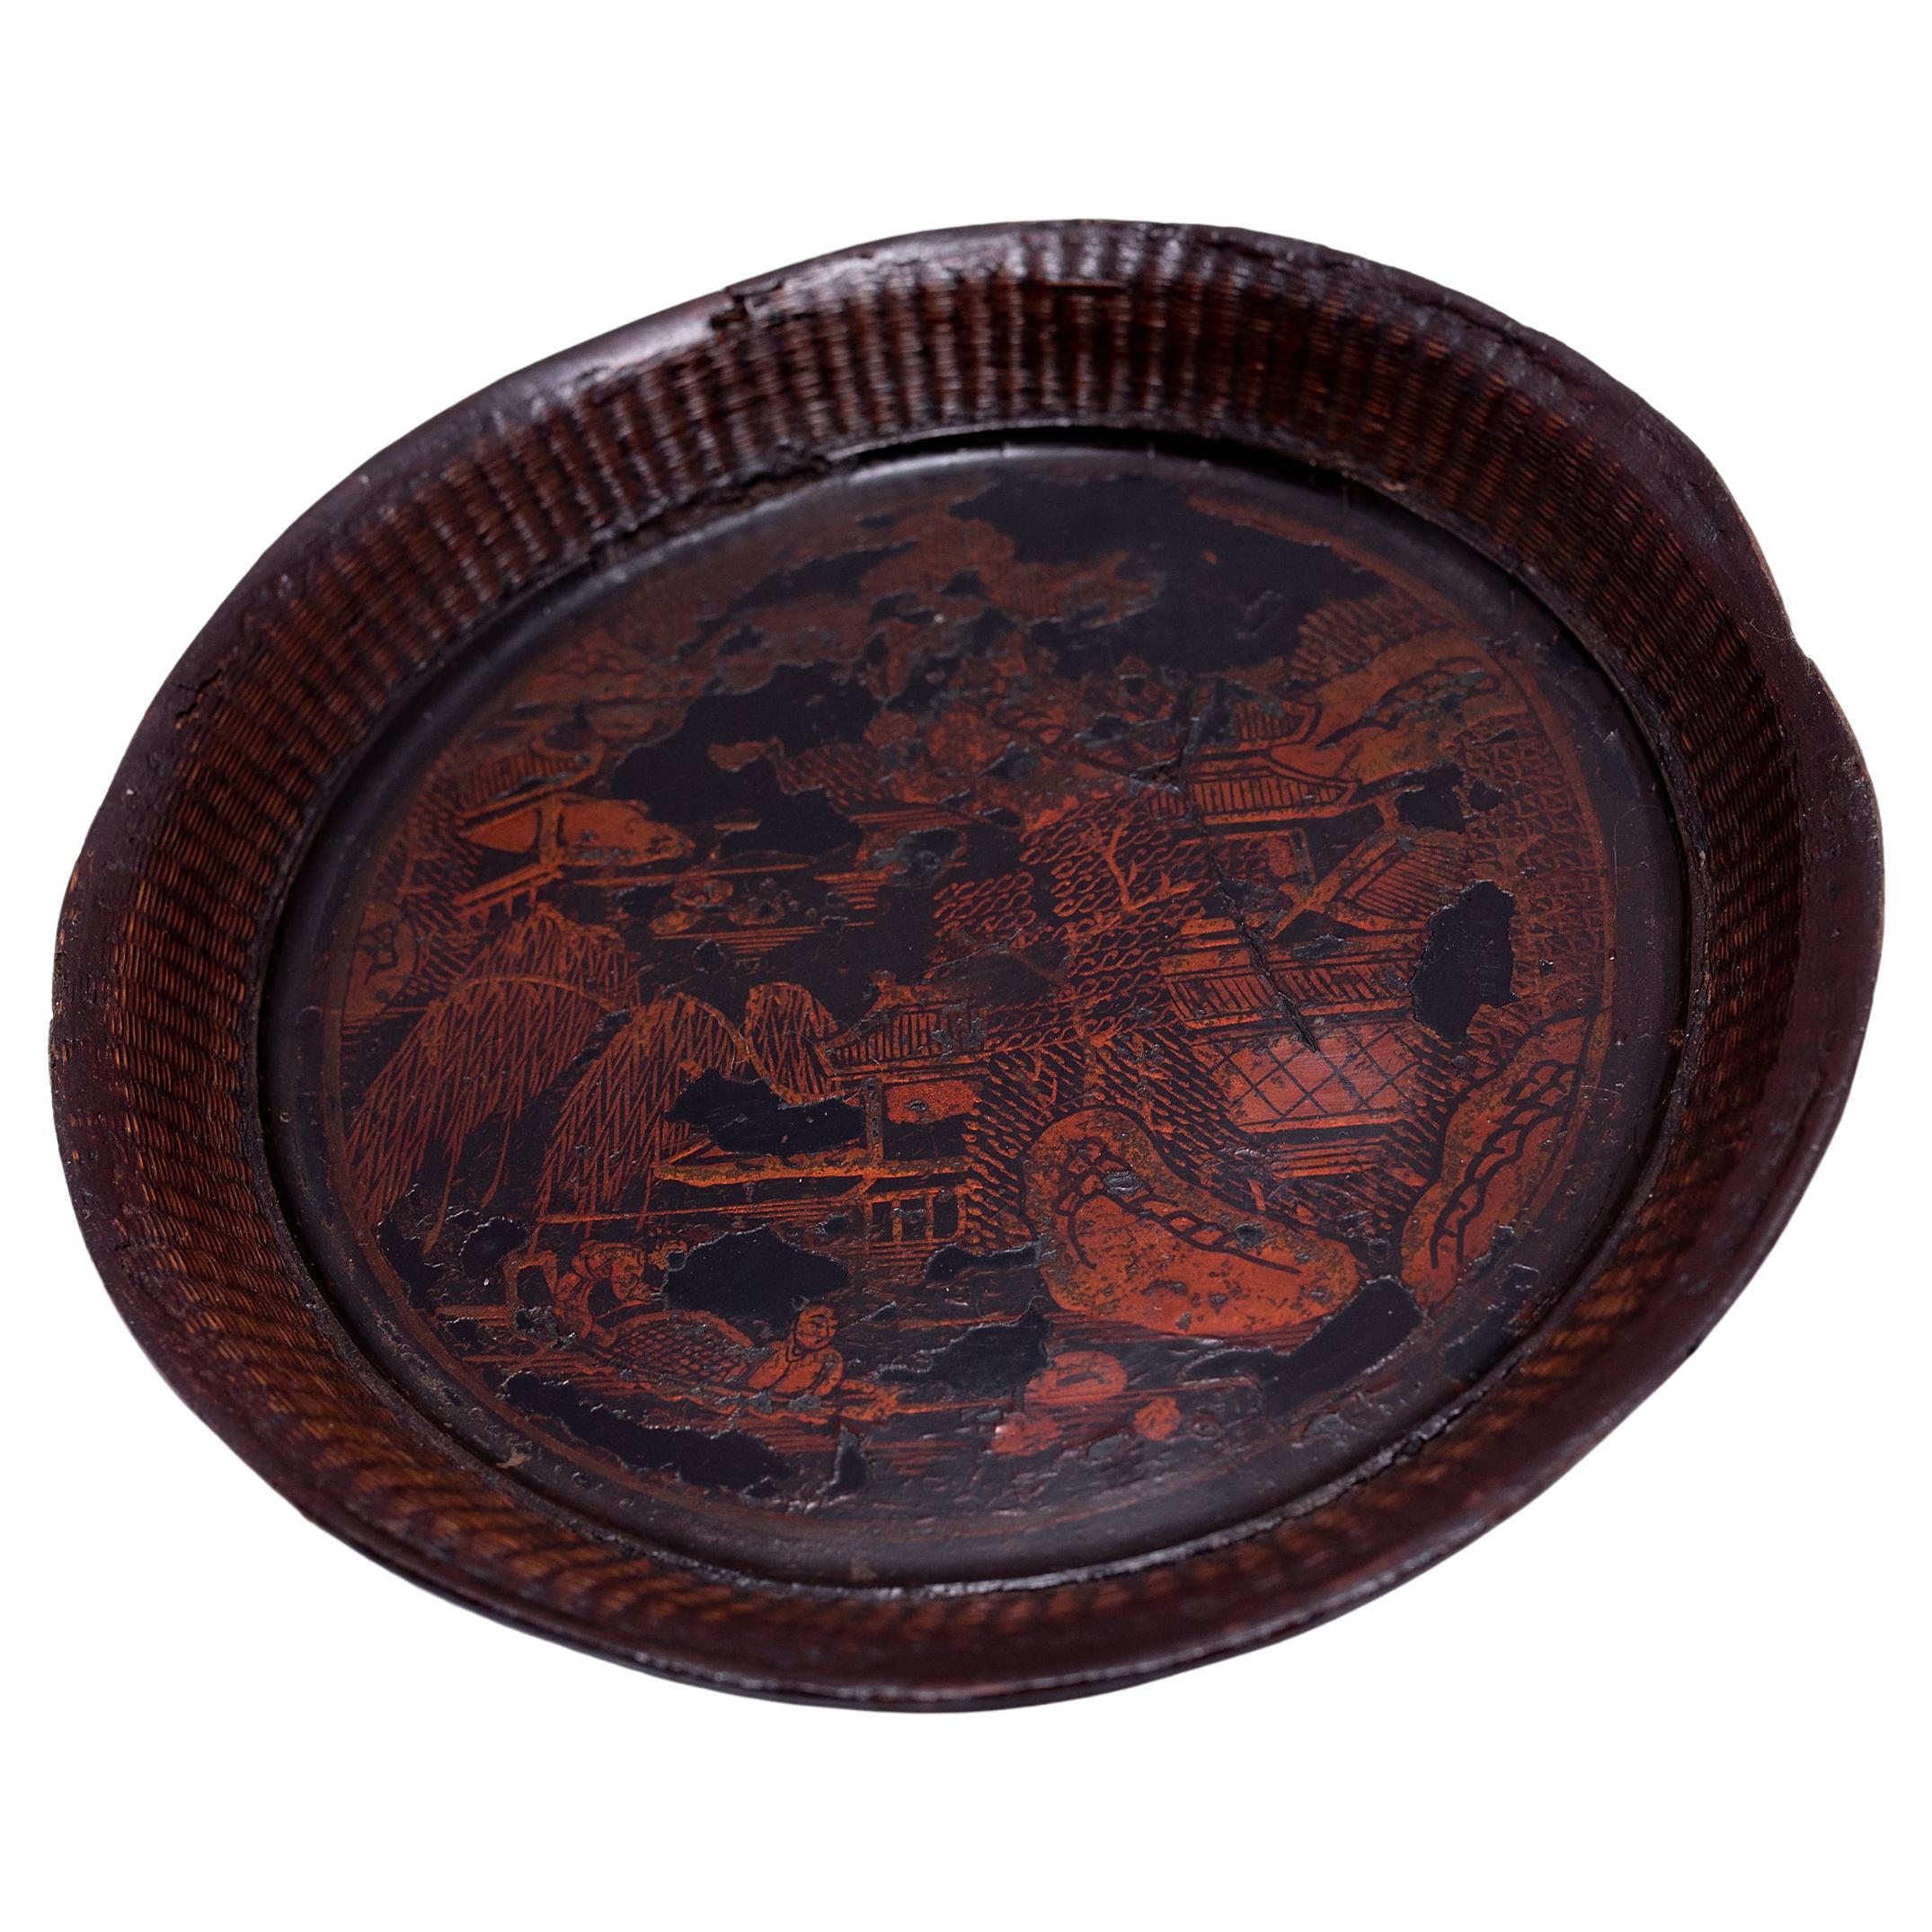 Petite Chinese Gilt Offering Plate, c. 1850